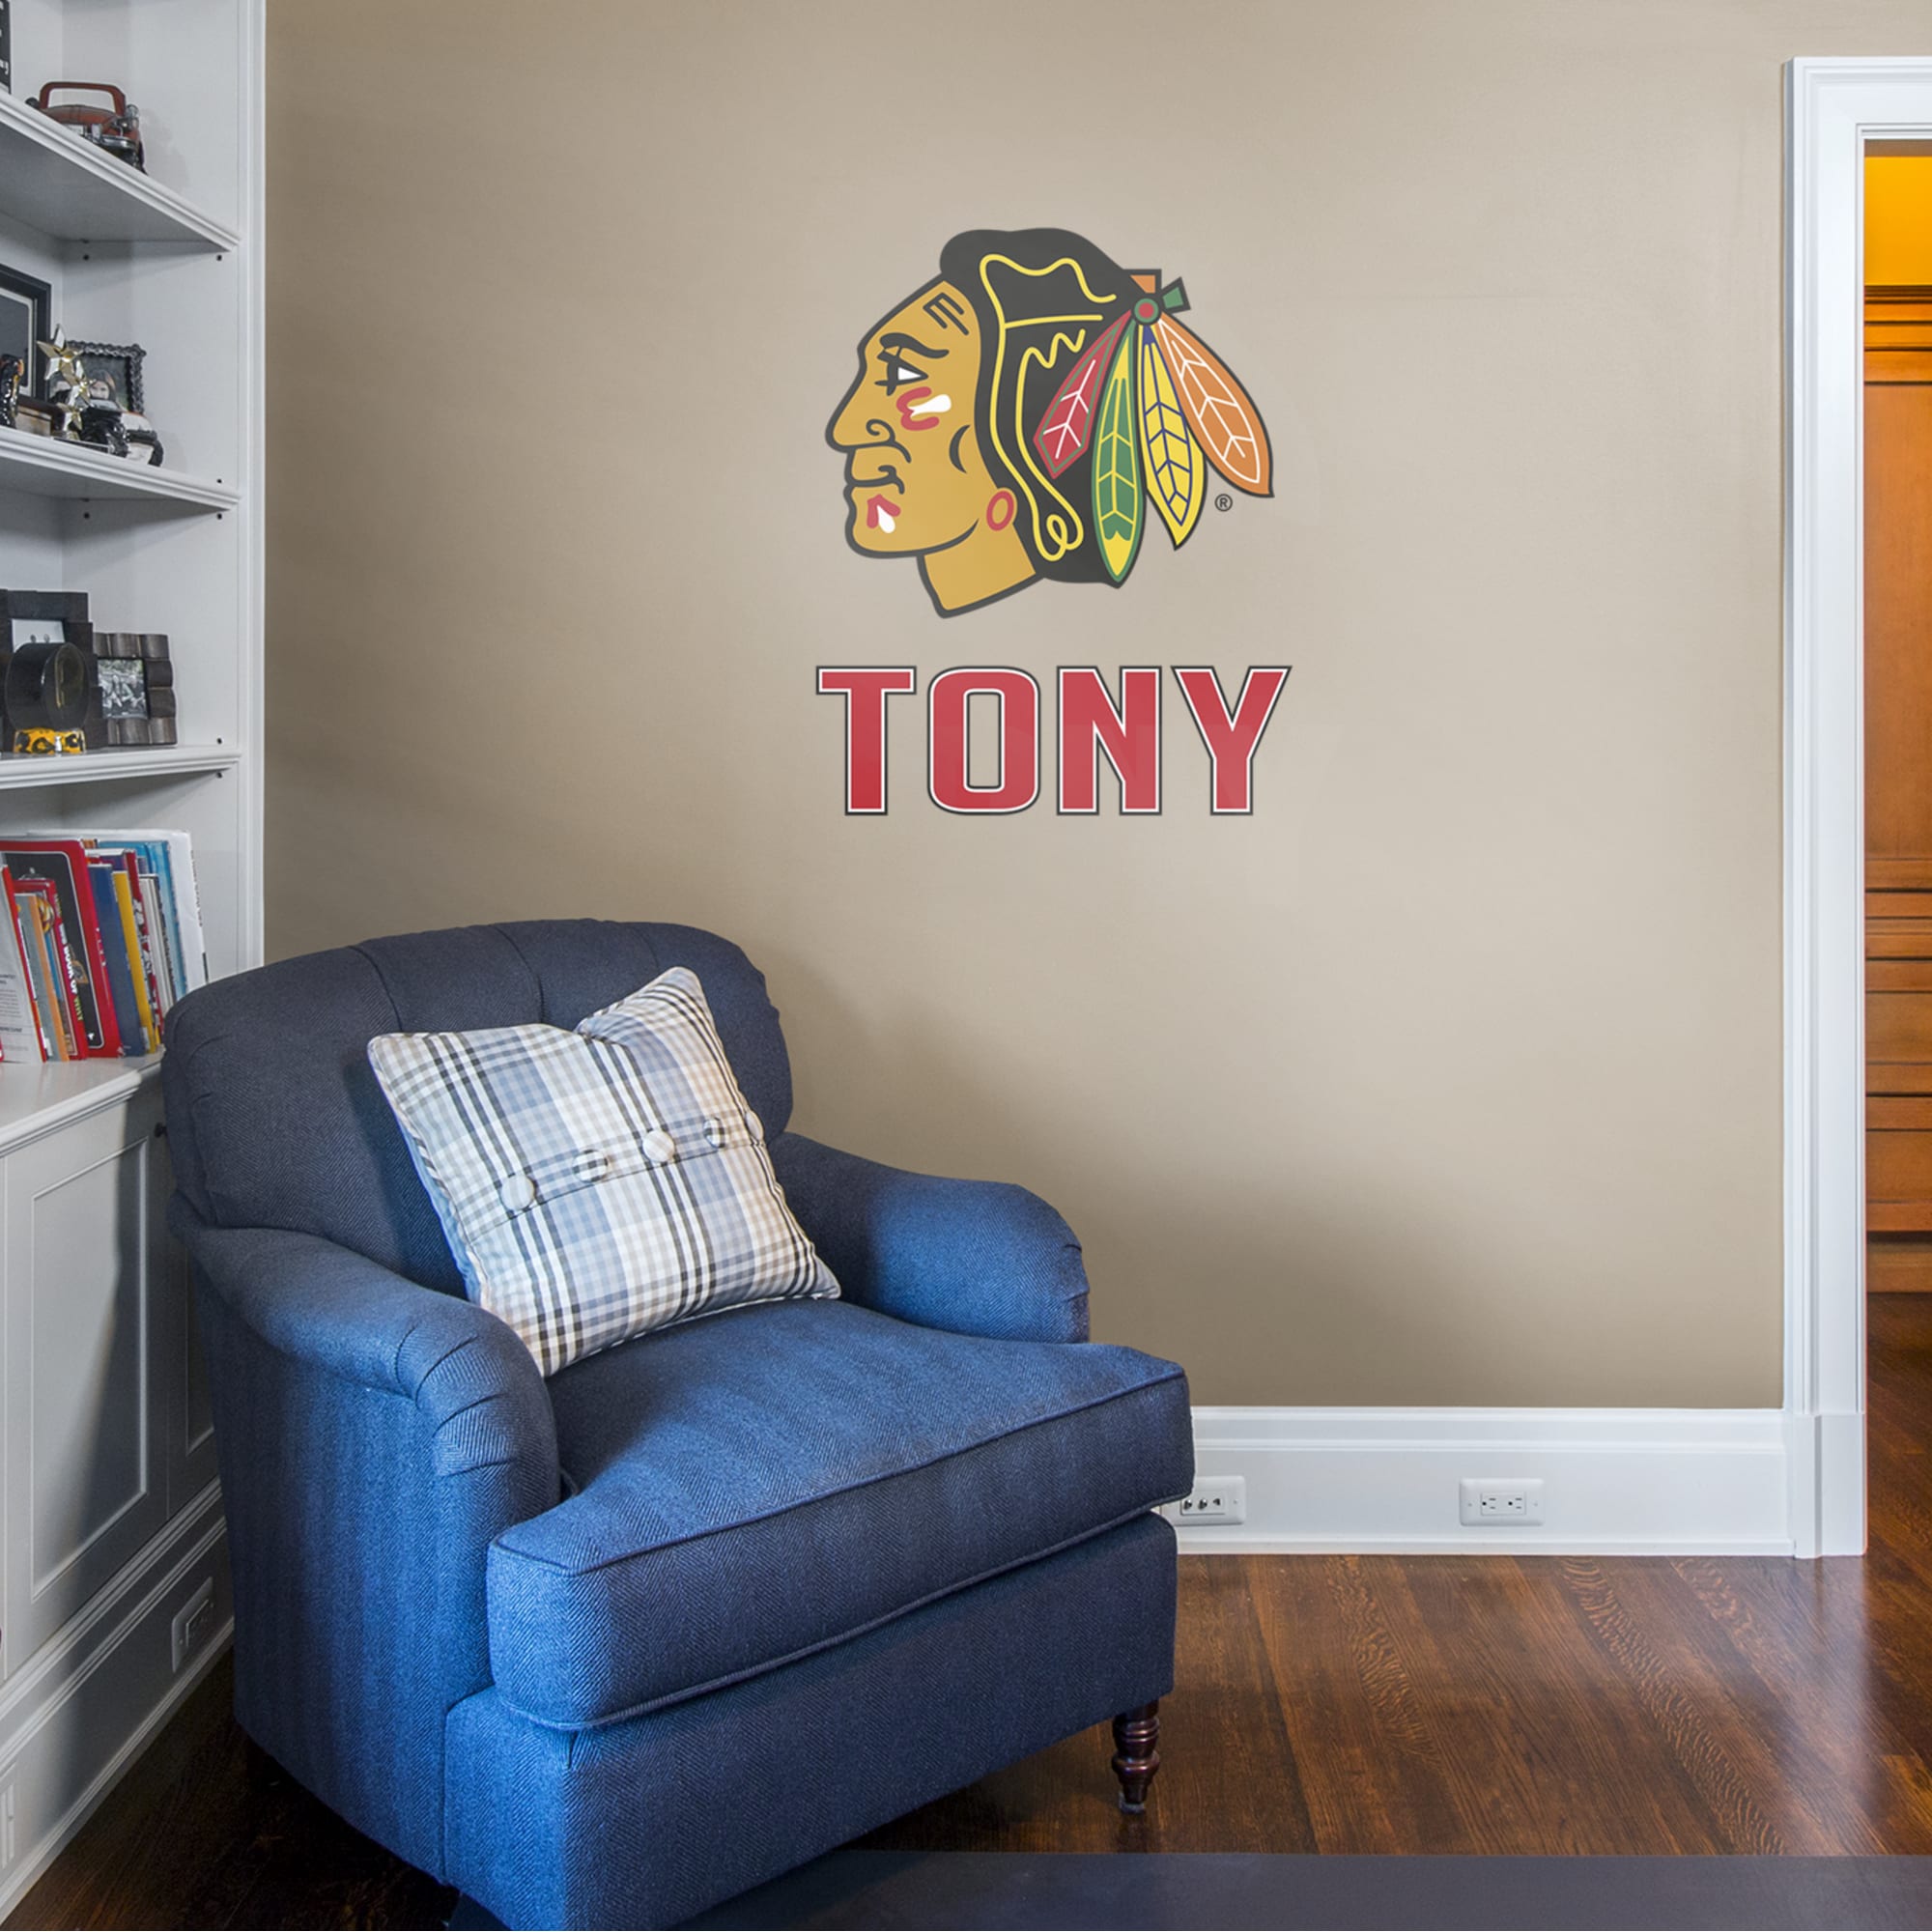 Chicago Blackhawks: Stacked Personalized Name - Officially Licensed NHL Transfer Decal in Red (39.5"W x 52"H) by Fathead | Vinyl